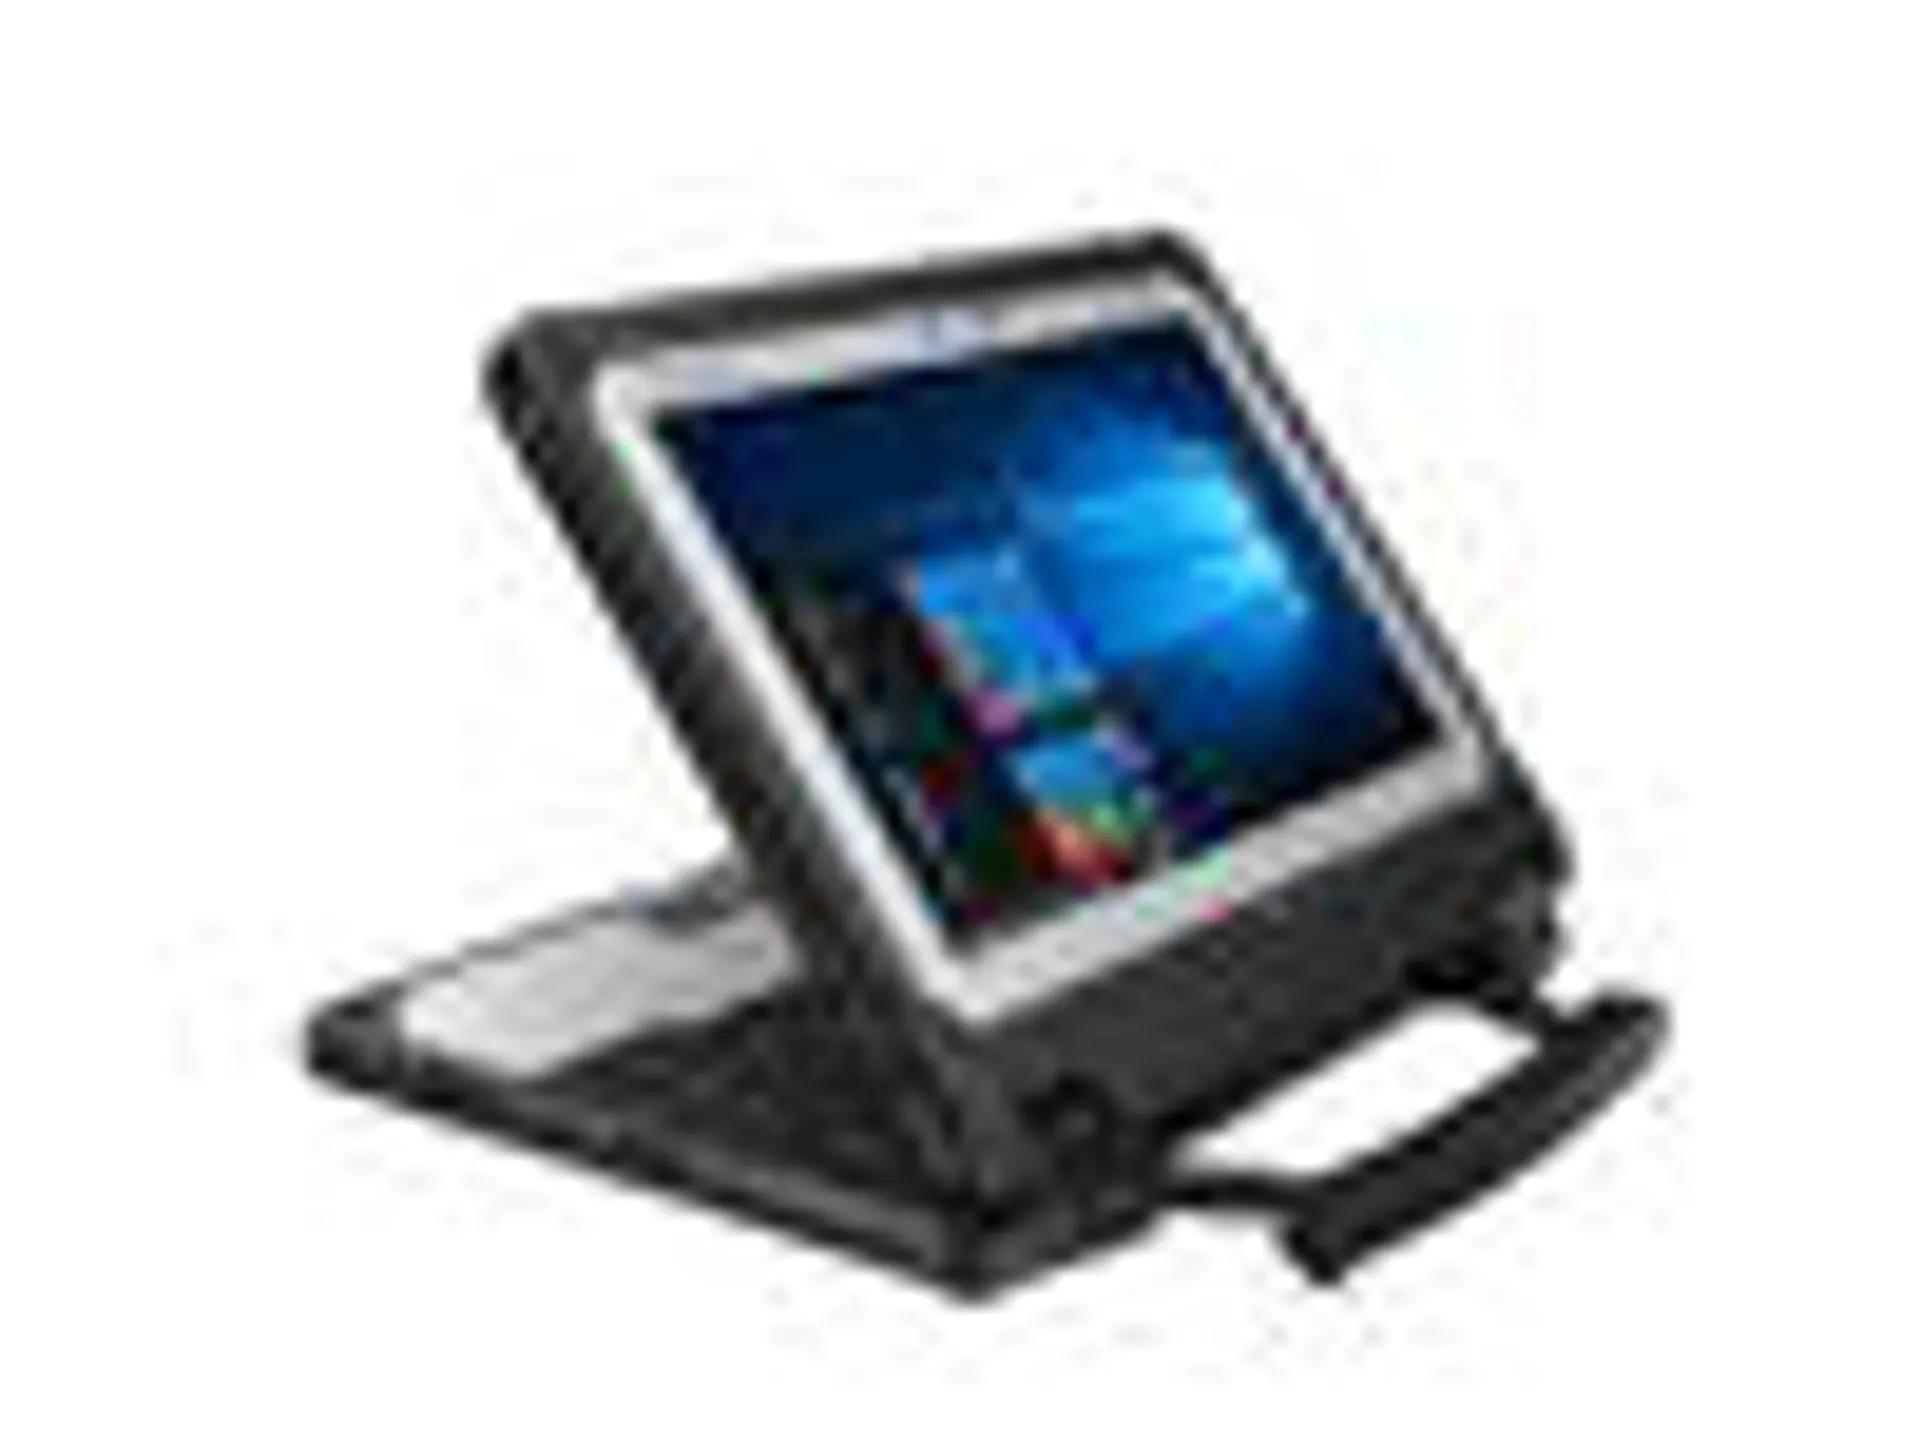 TOUGHBOOK 20